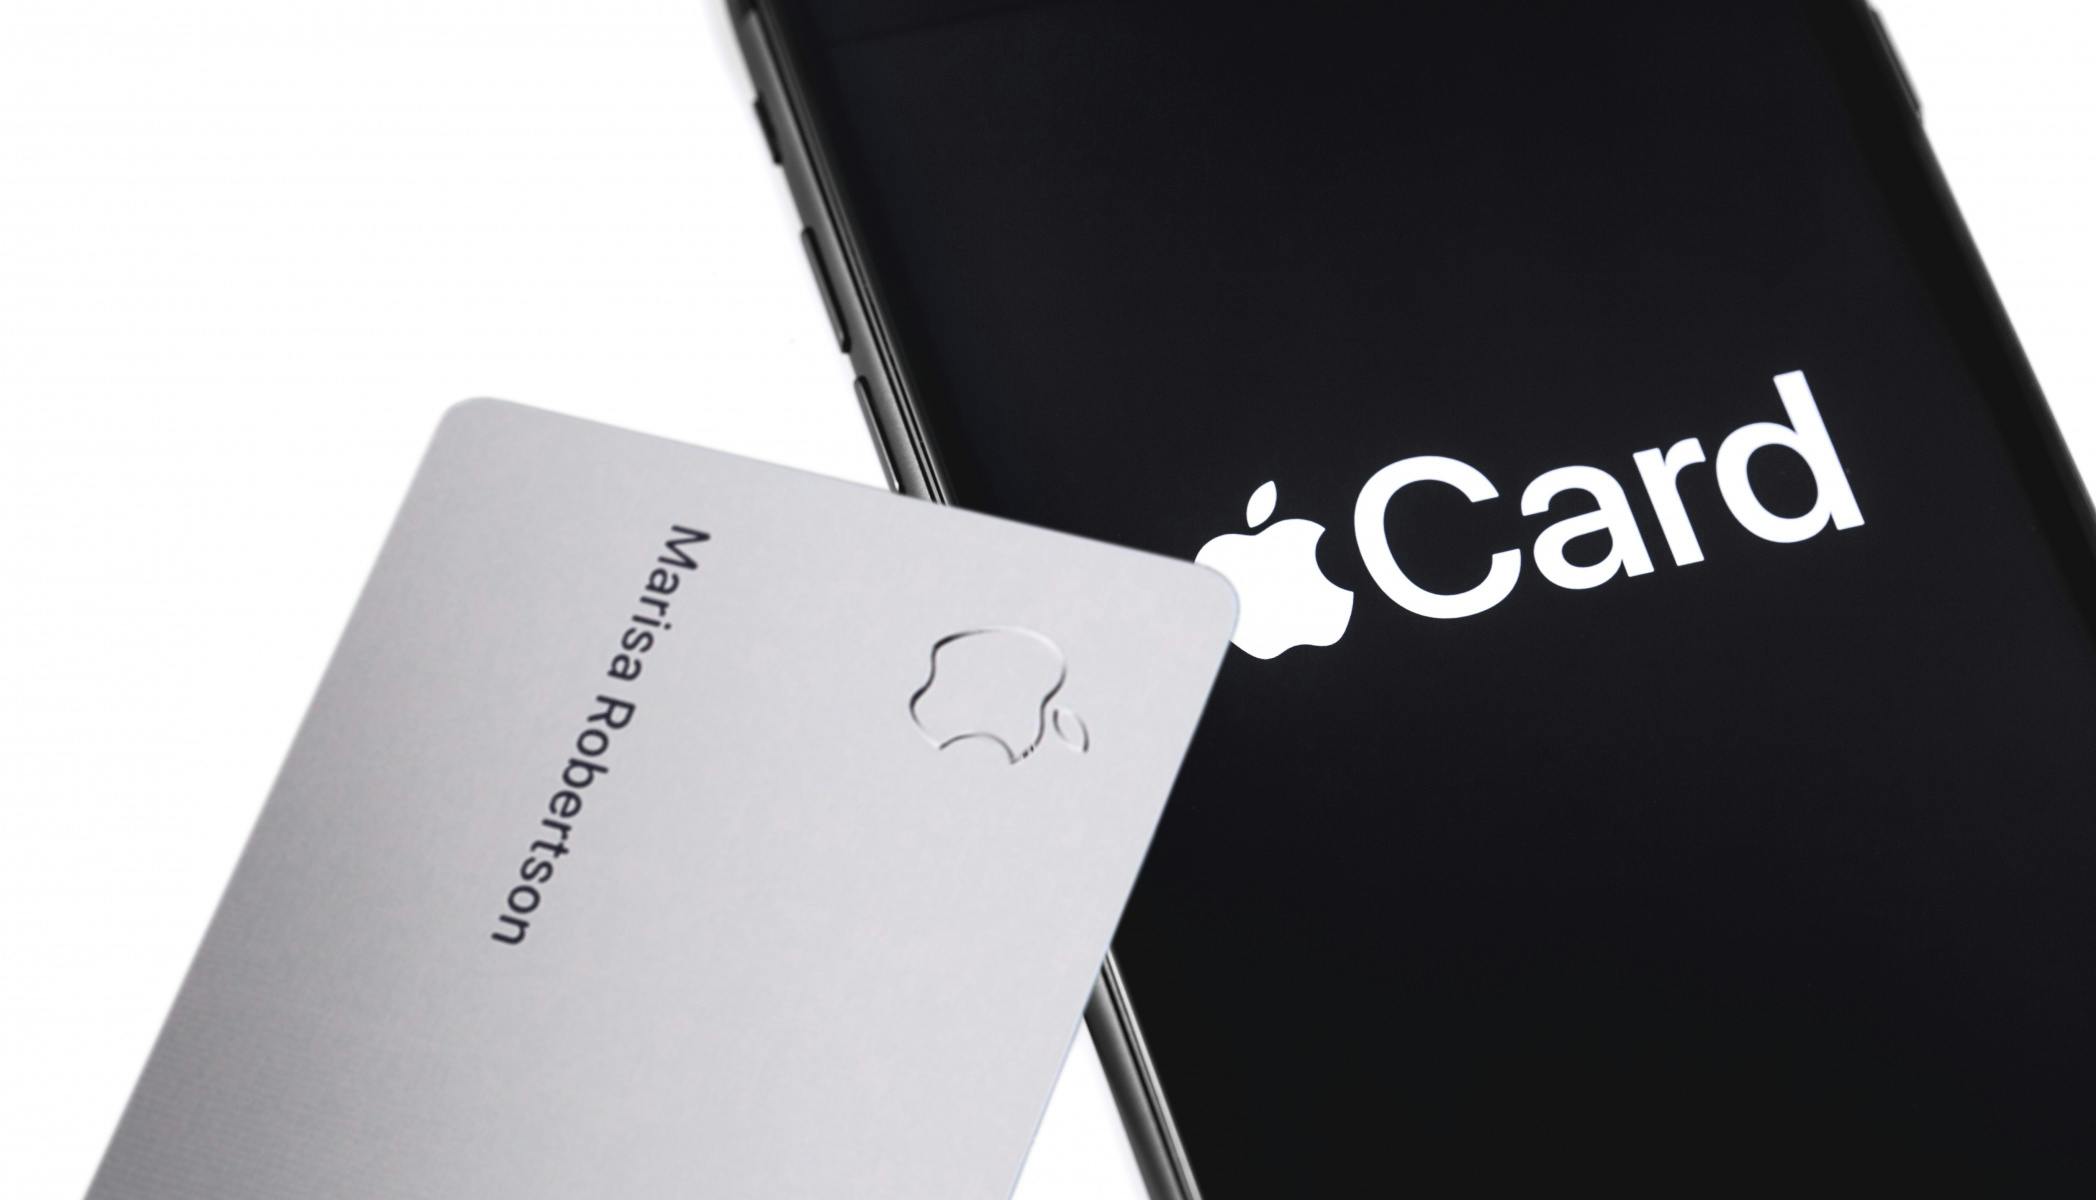 Mark Ritson The Apple Card Fiasco Is A Brand Risk But Not A